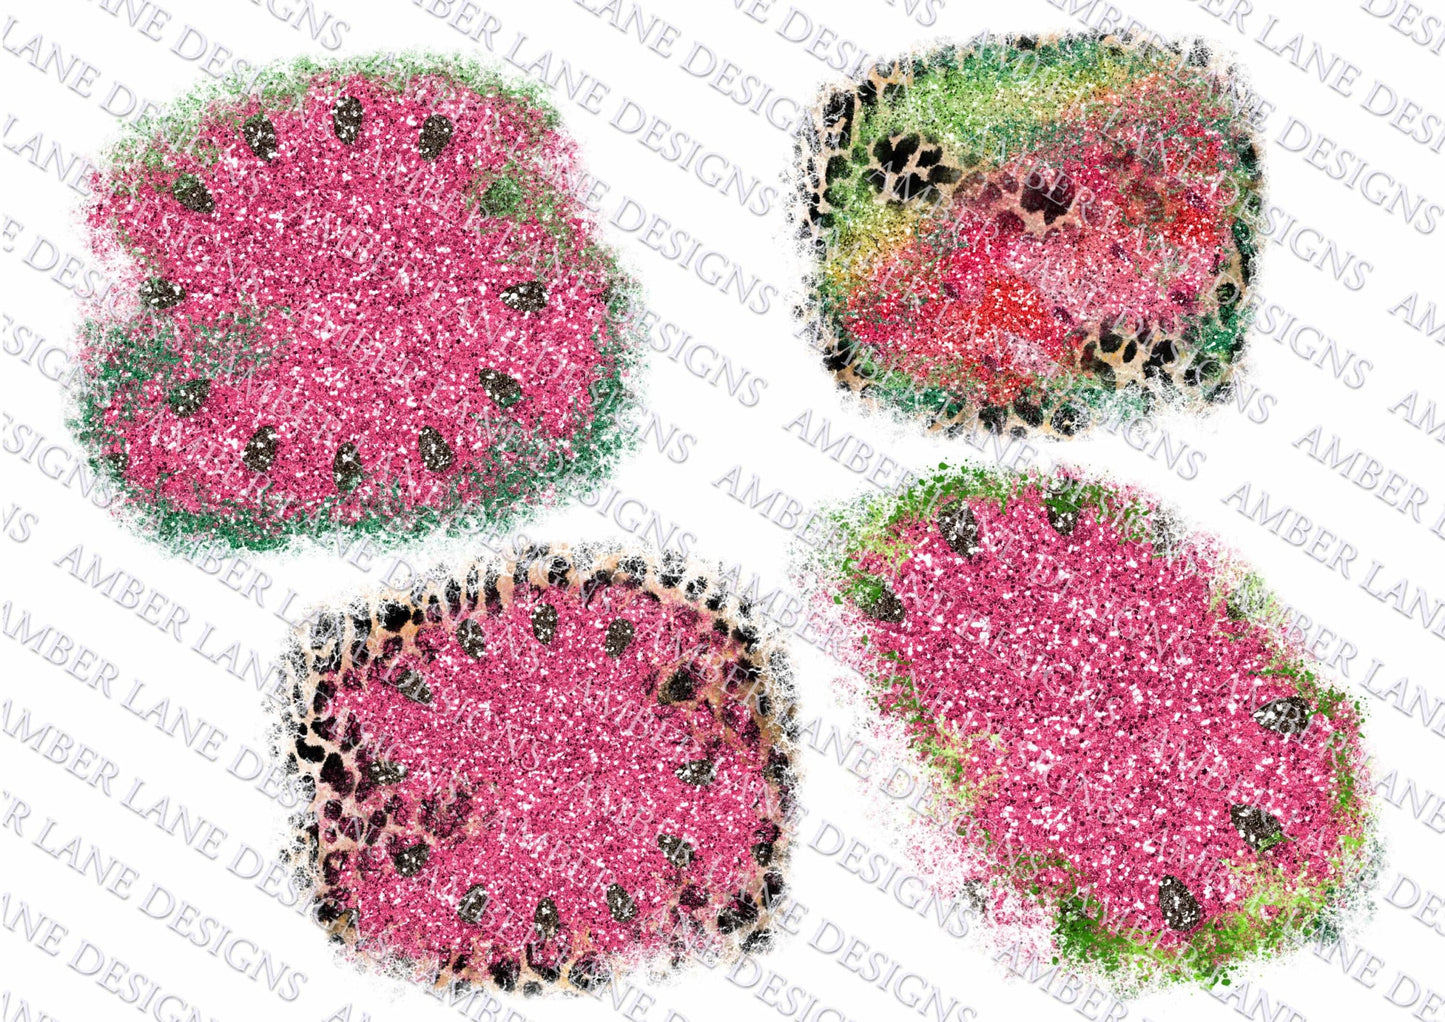 Watermelon leopard and glitter patches, design elements for t-shirts, 4 png files